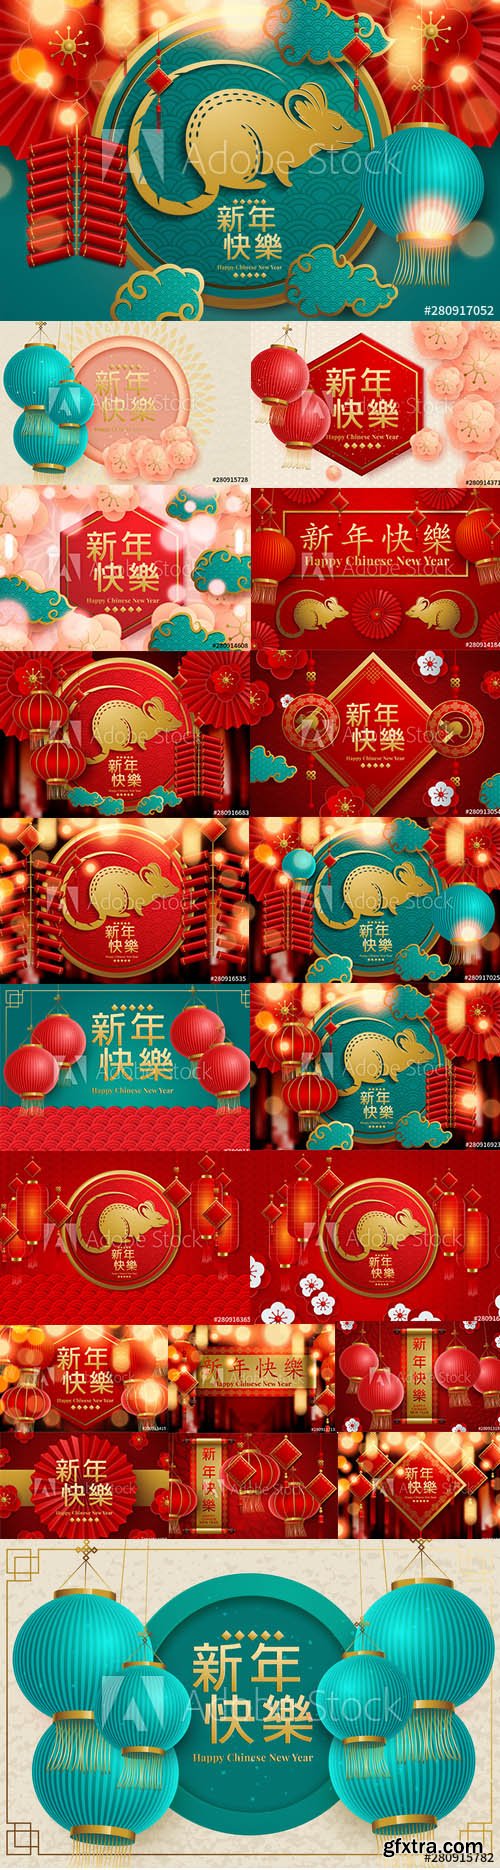 Set of Chinese New Year 2020 Web Banner and Illustration